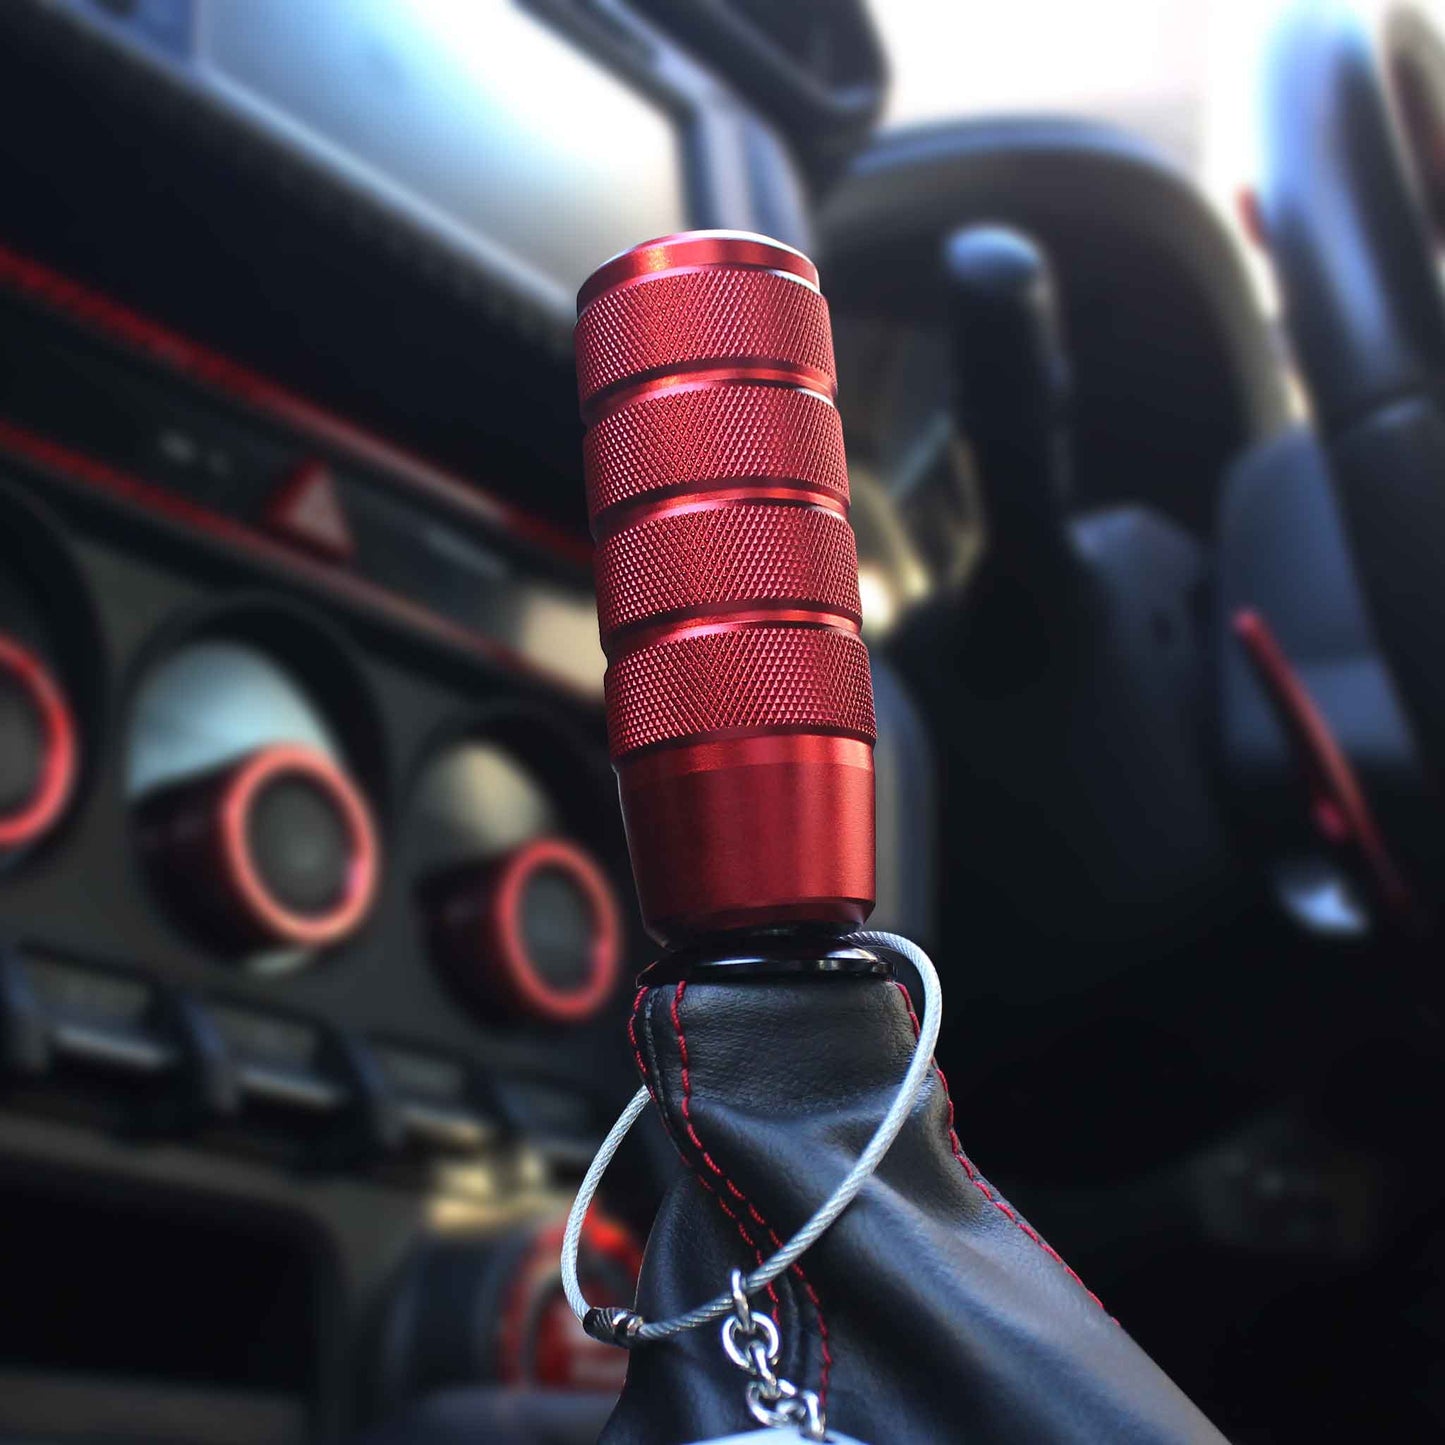 A red Nagao is installed on an auto Toyota 86 with no gap between the shift knob and the shift boot